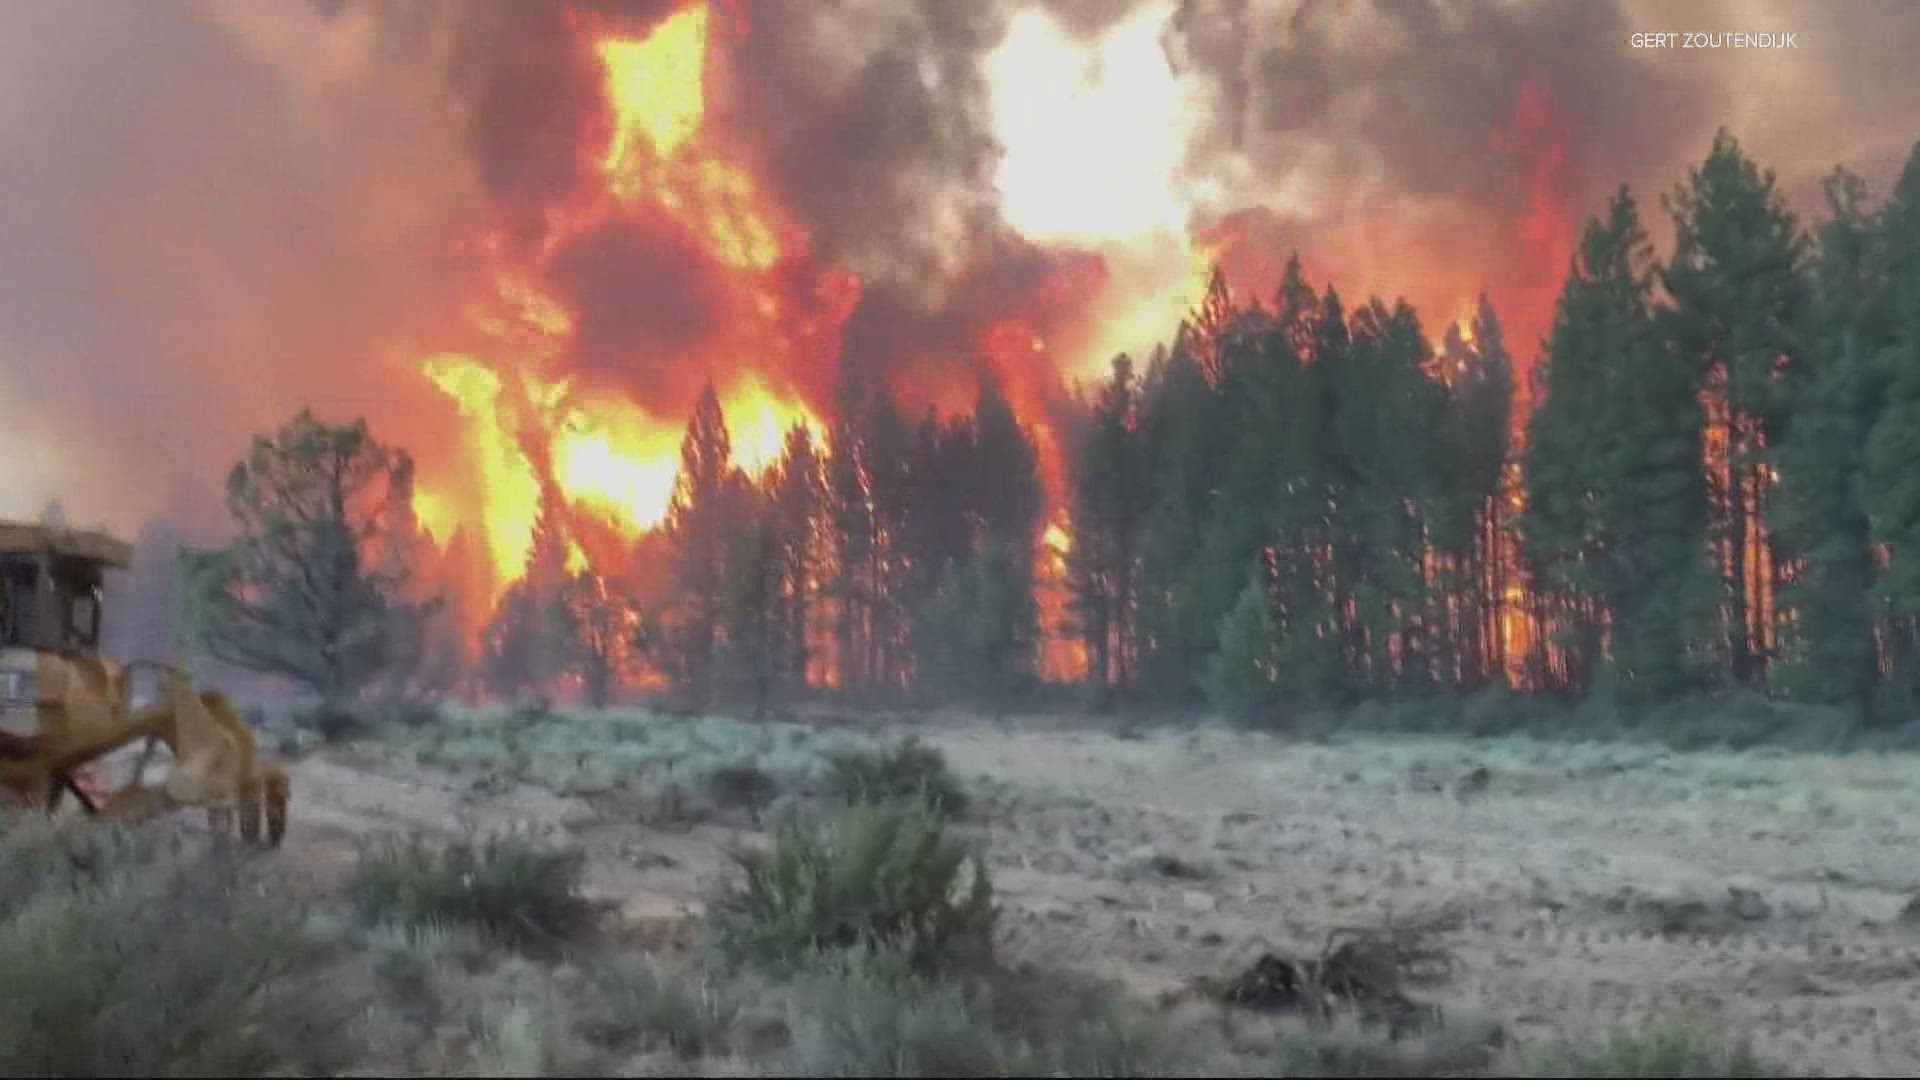 The Bootleg Fire, burning east of Crater Lake and Klamath Falls, has grown to more than 150,000 acres. It’s still zero percent contained.